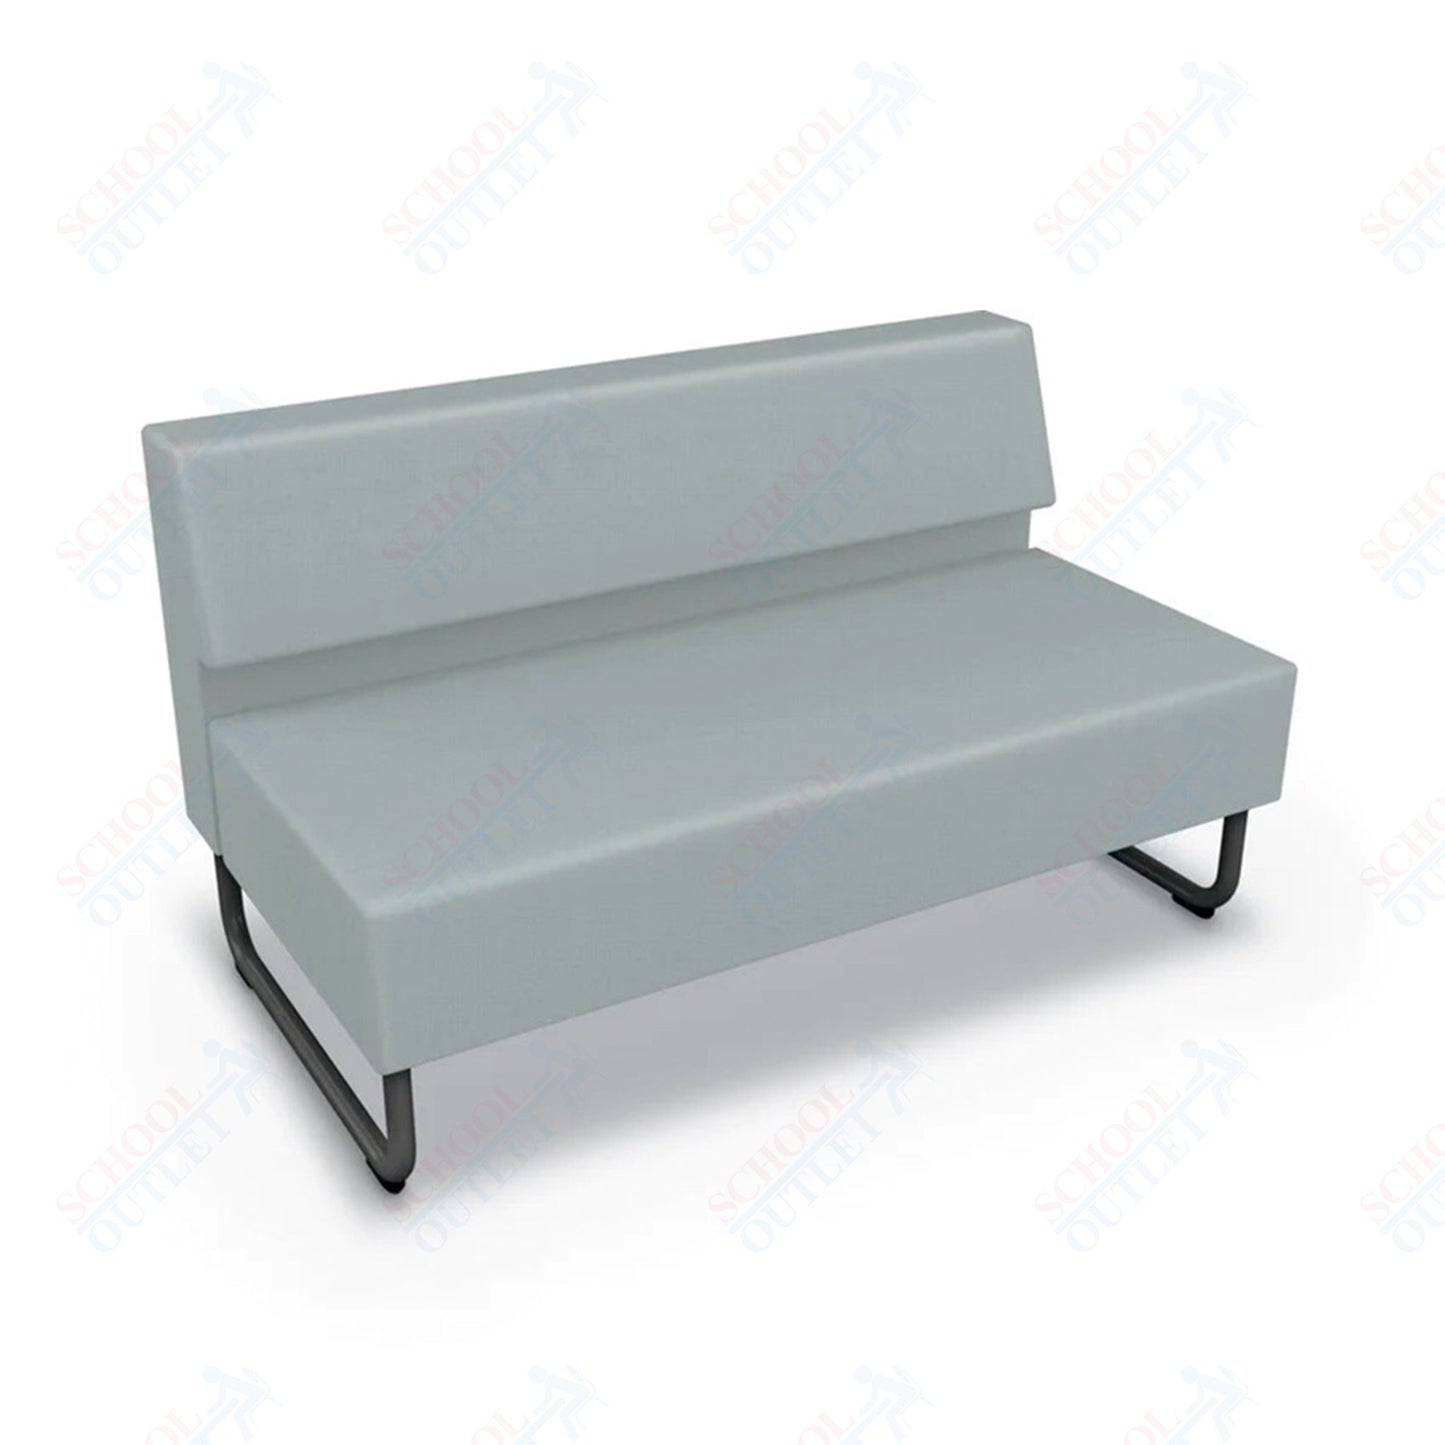 Mooreco Akt Soft Seating Lounge Loveseat - Armless - Grade 02 Fabric and Powder Coated Sled Legs